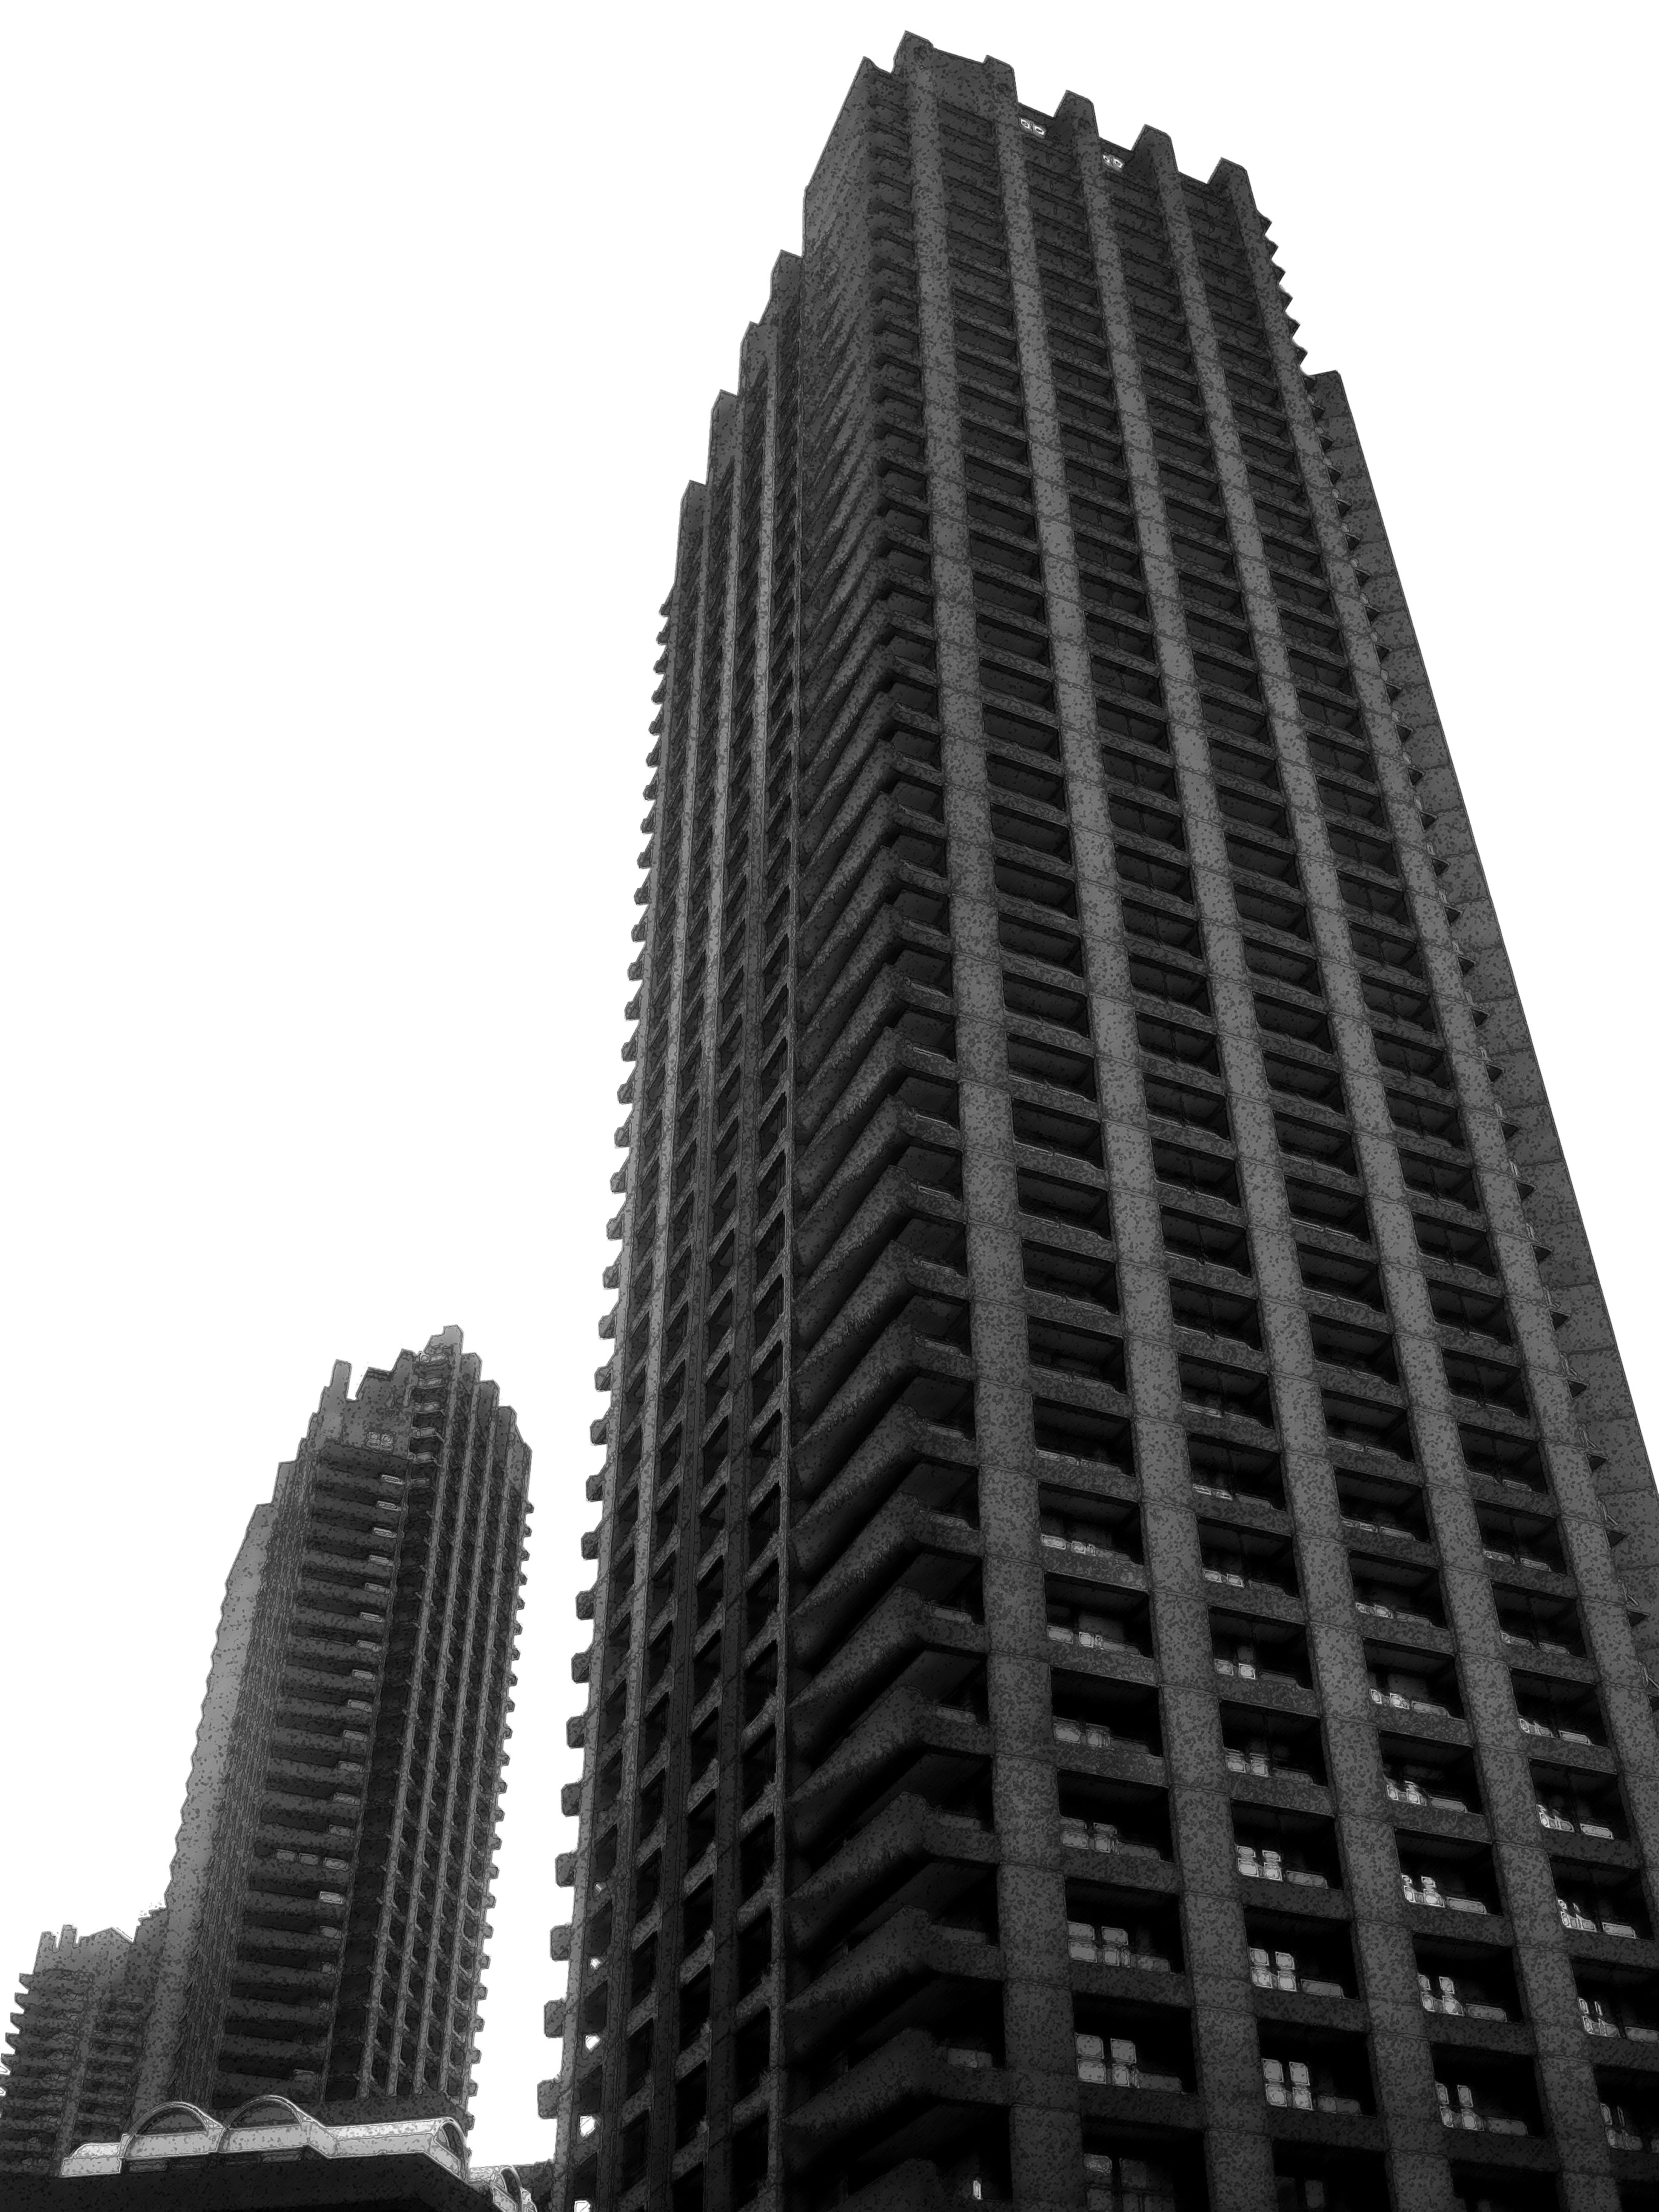 An iconic example of brutalist architecture: Barbican Towers in London